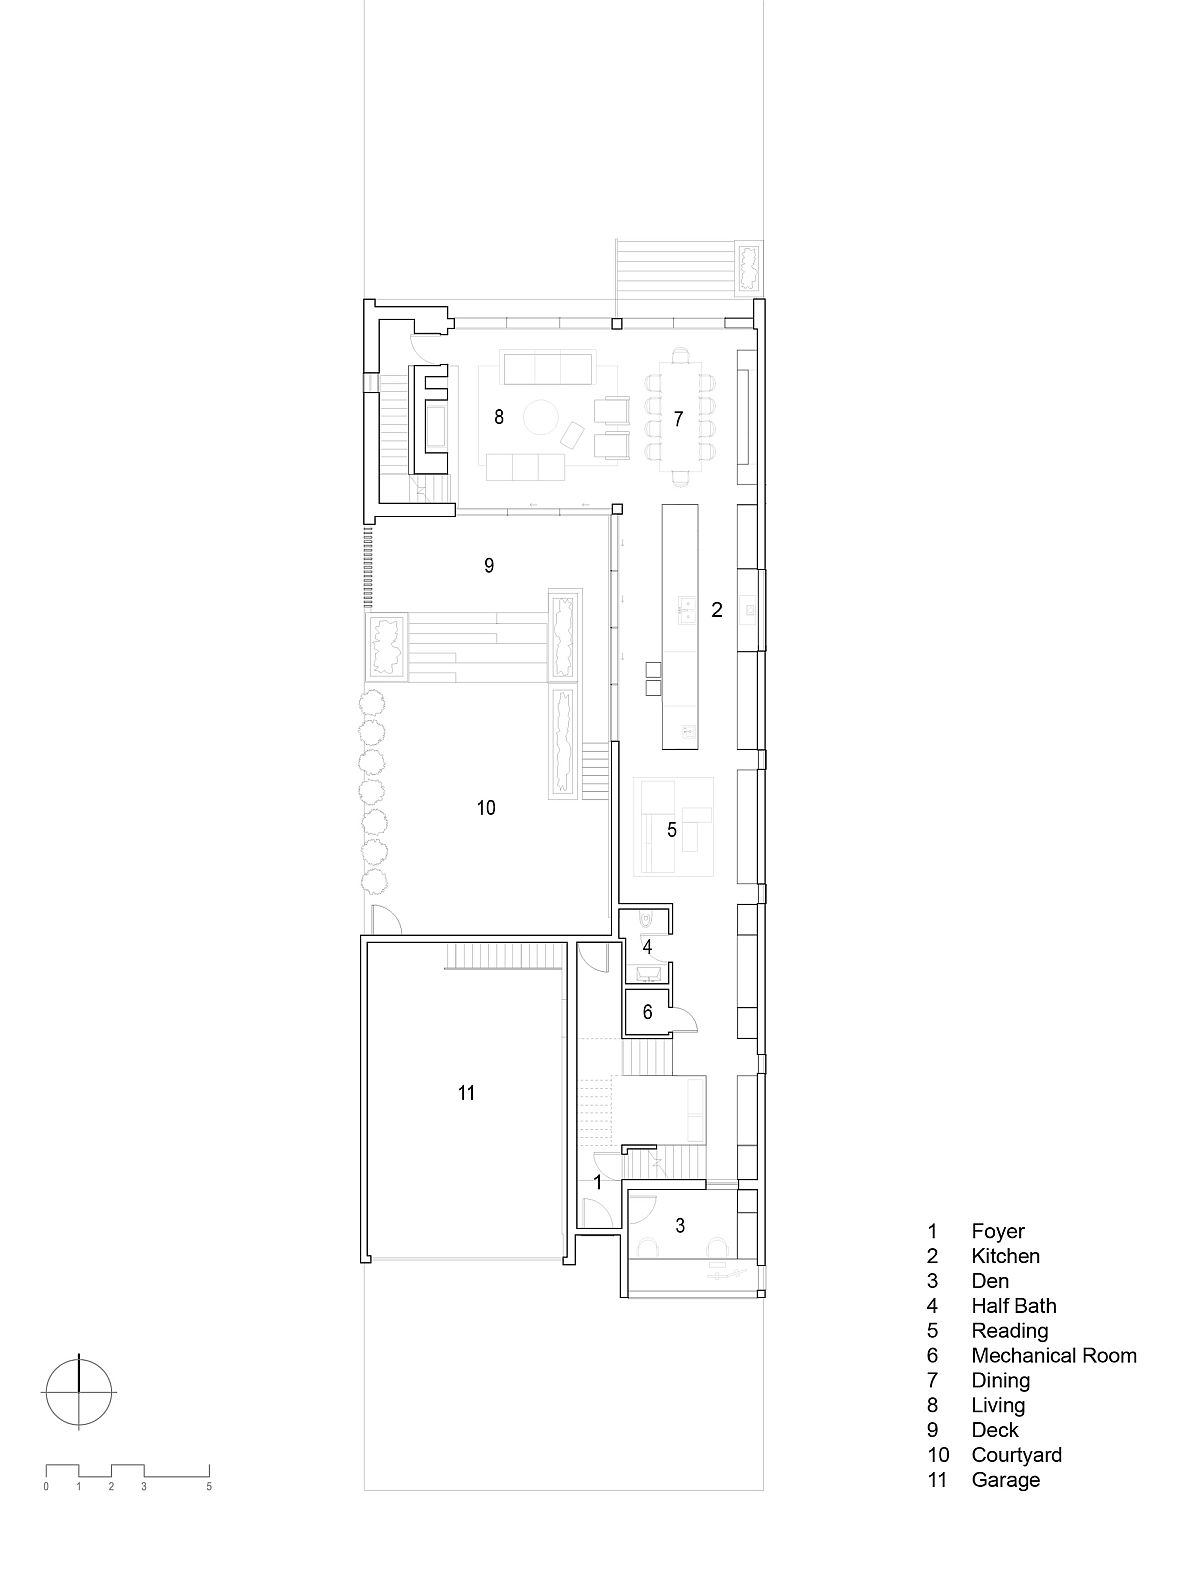 Floor plan of New House in Calgary, Canada with multi-level interior